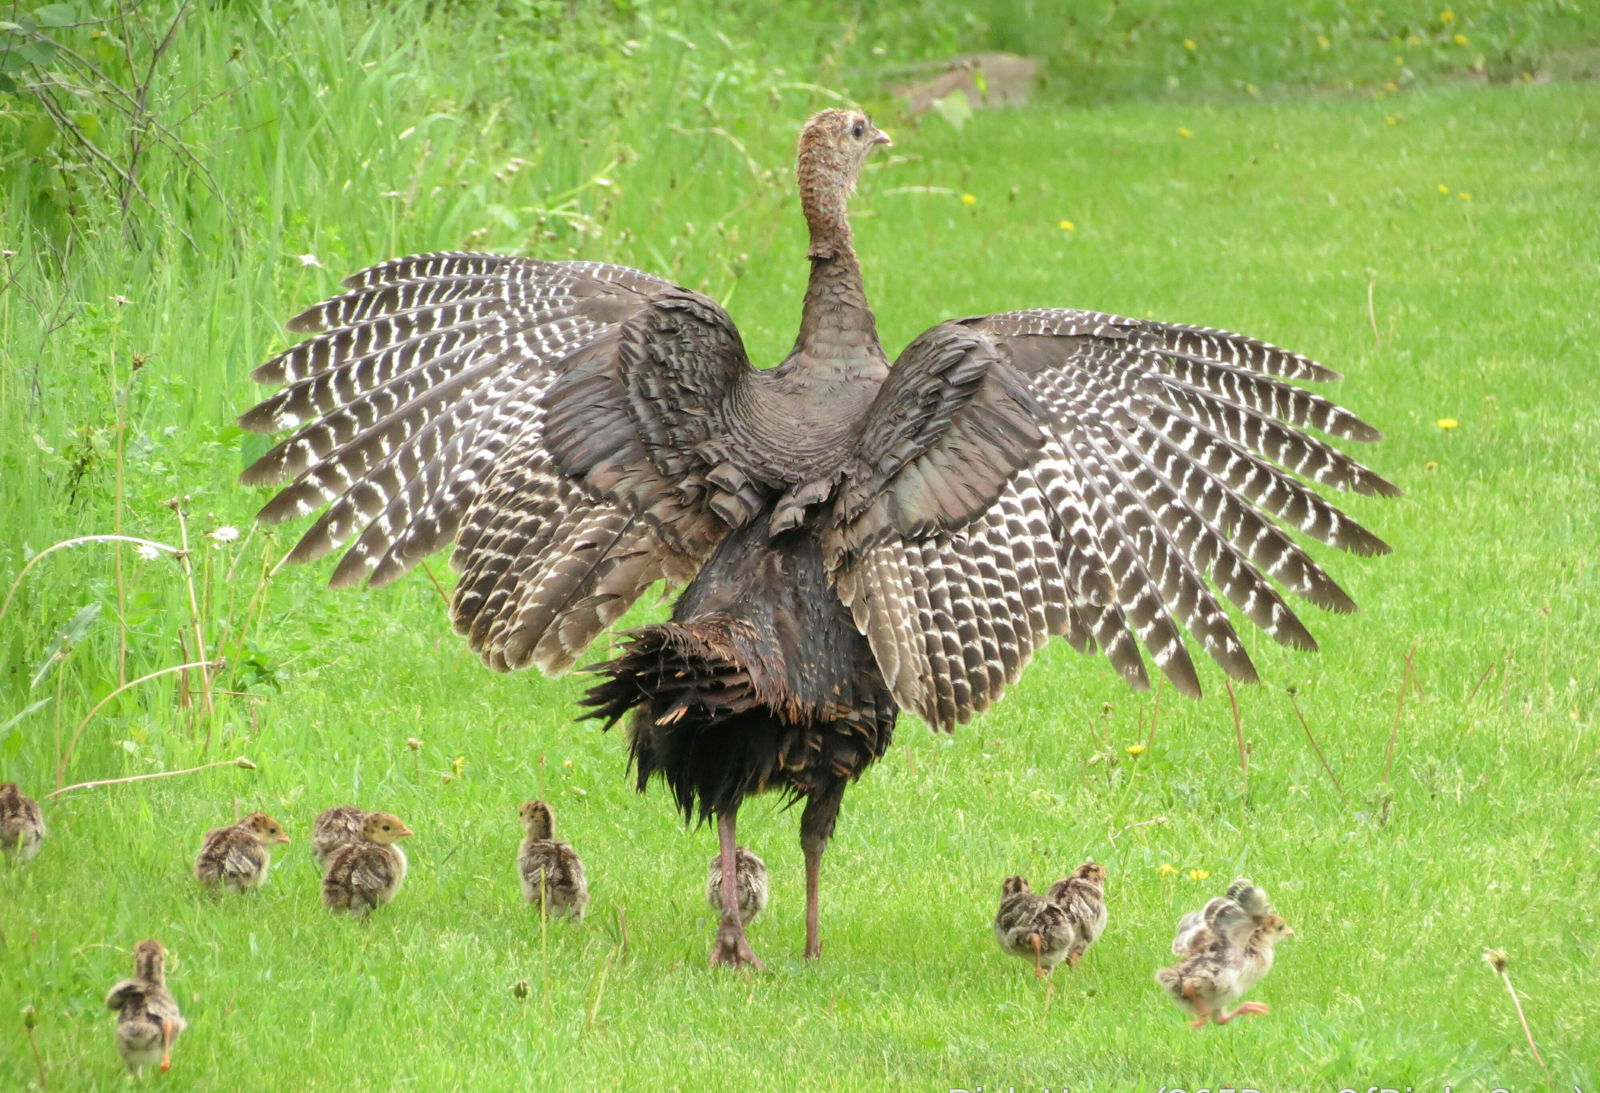 turkey in a pasture spreading her wings over her poults